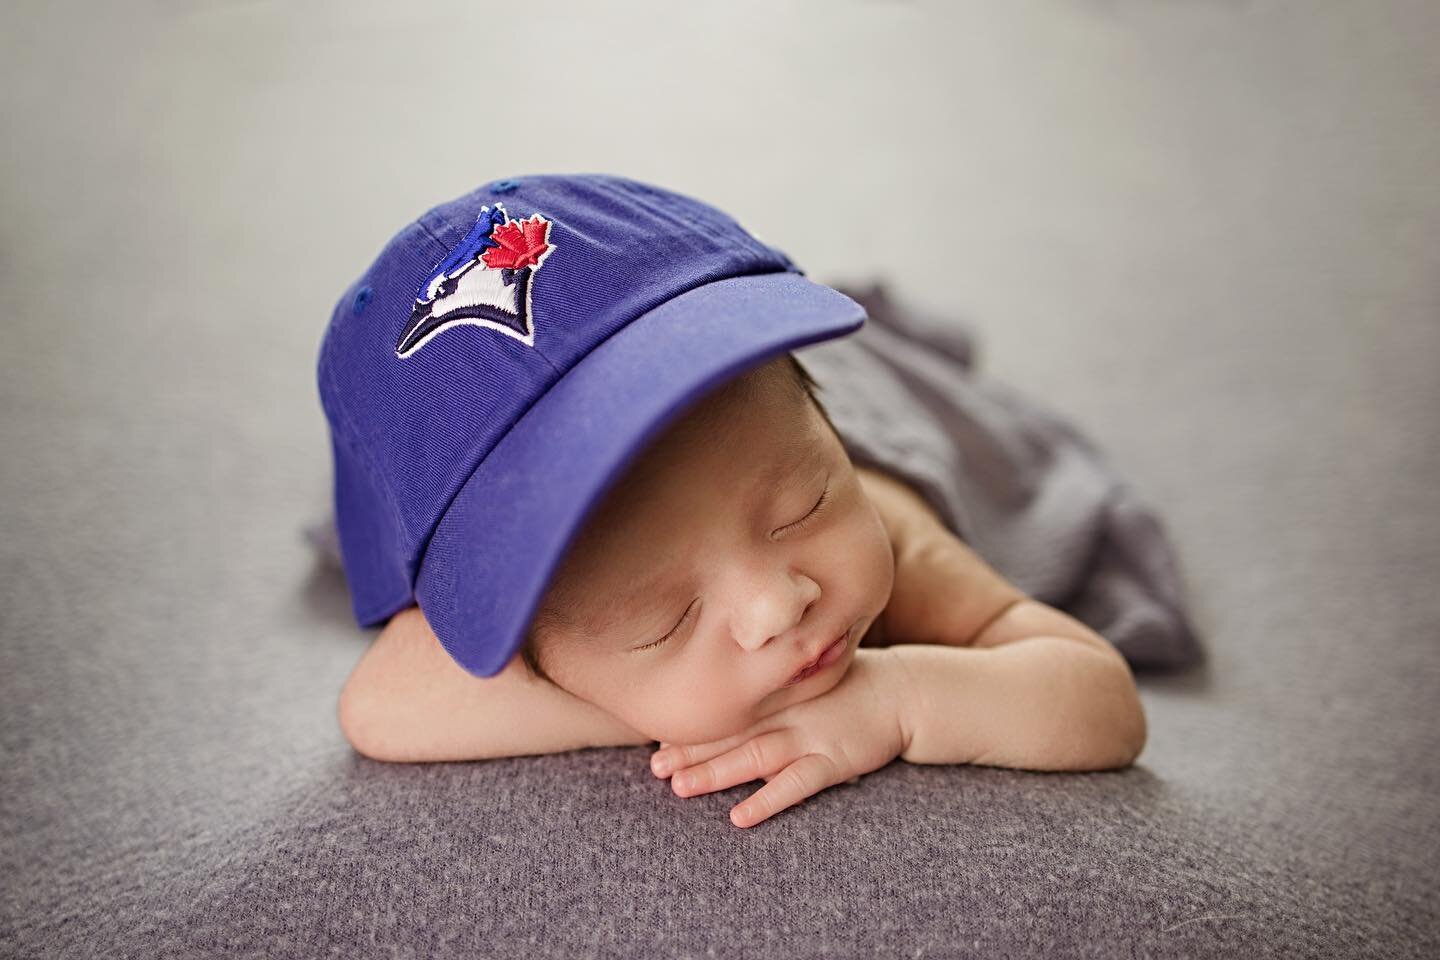 A family moment that spans across generations.

Baby's father wore the same Blue Jay cap in his baby photo, and years later, his boy is now wearing the exact same cap for his baby session. The cap has been passed down from father to son, making it a 